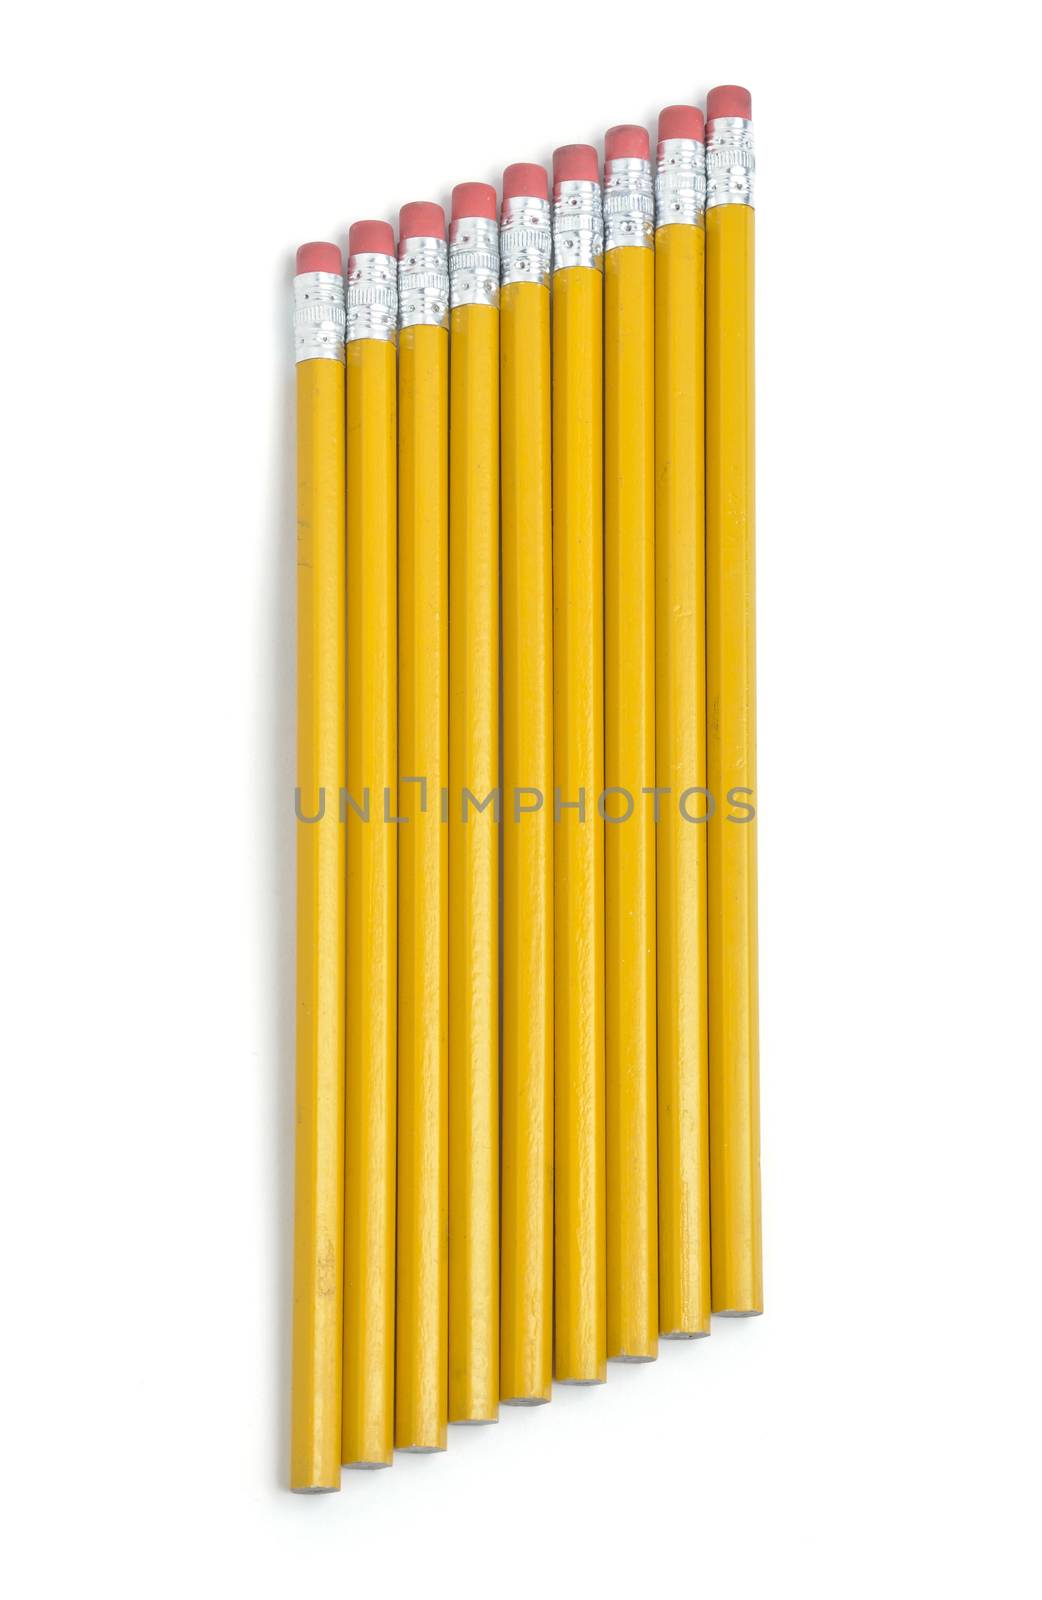 Row Of Number Two Pencils Ready For Use by rcarner